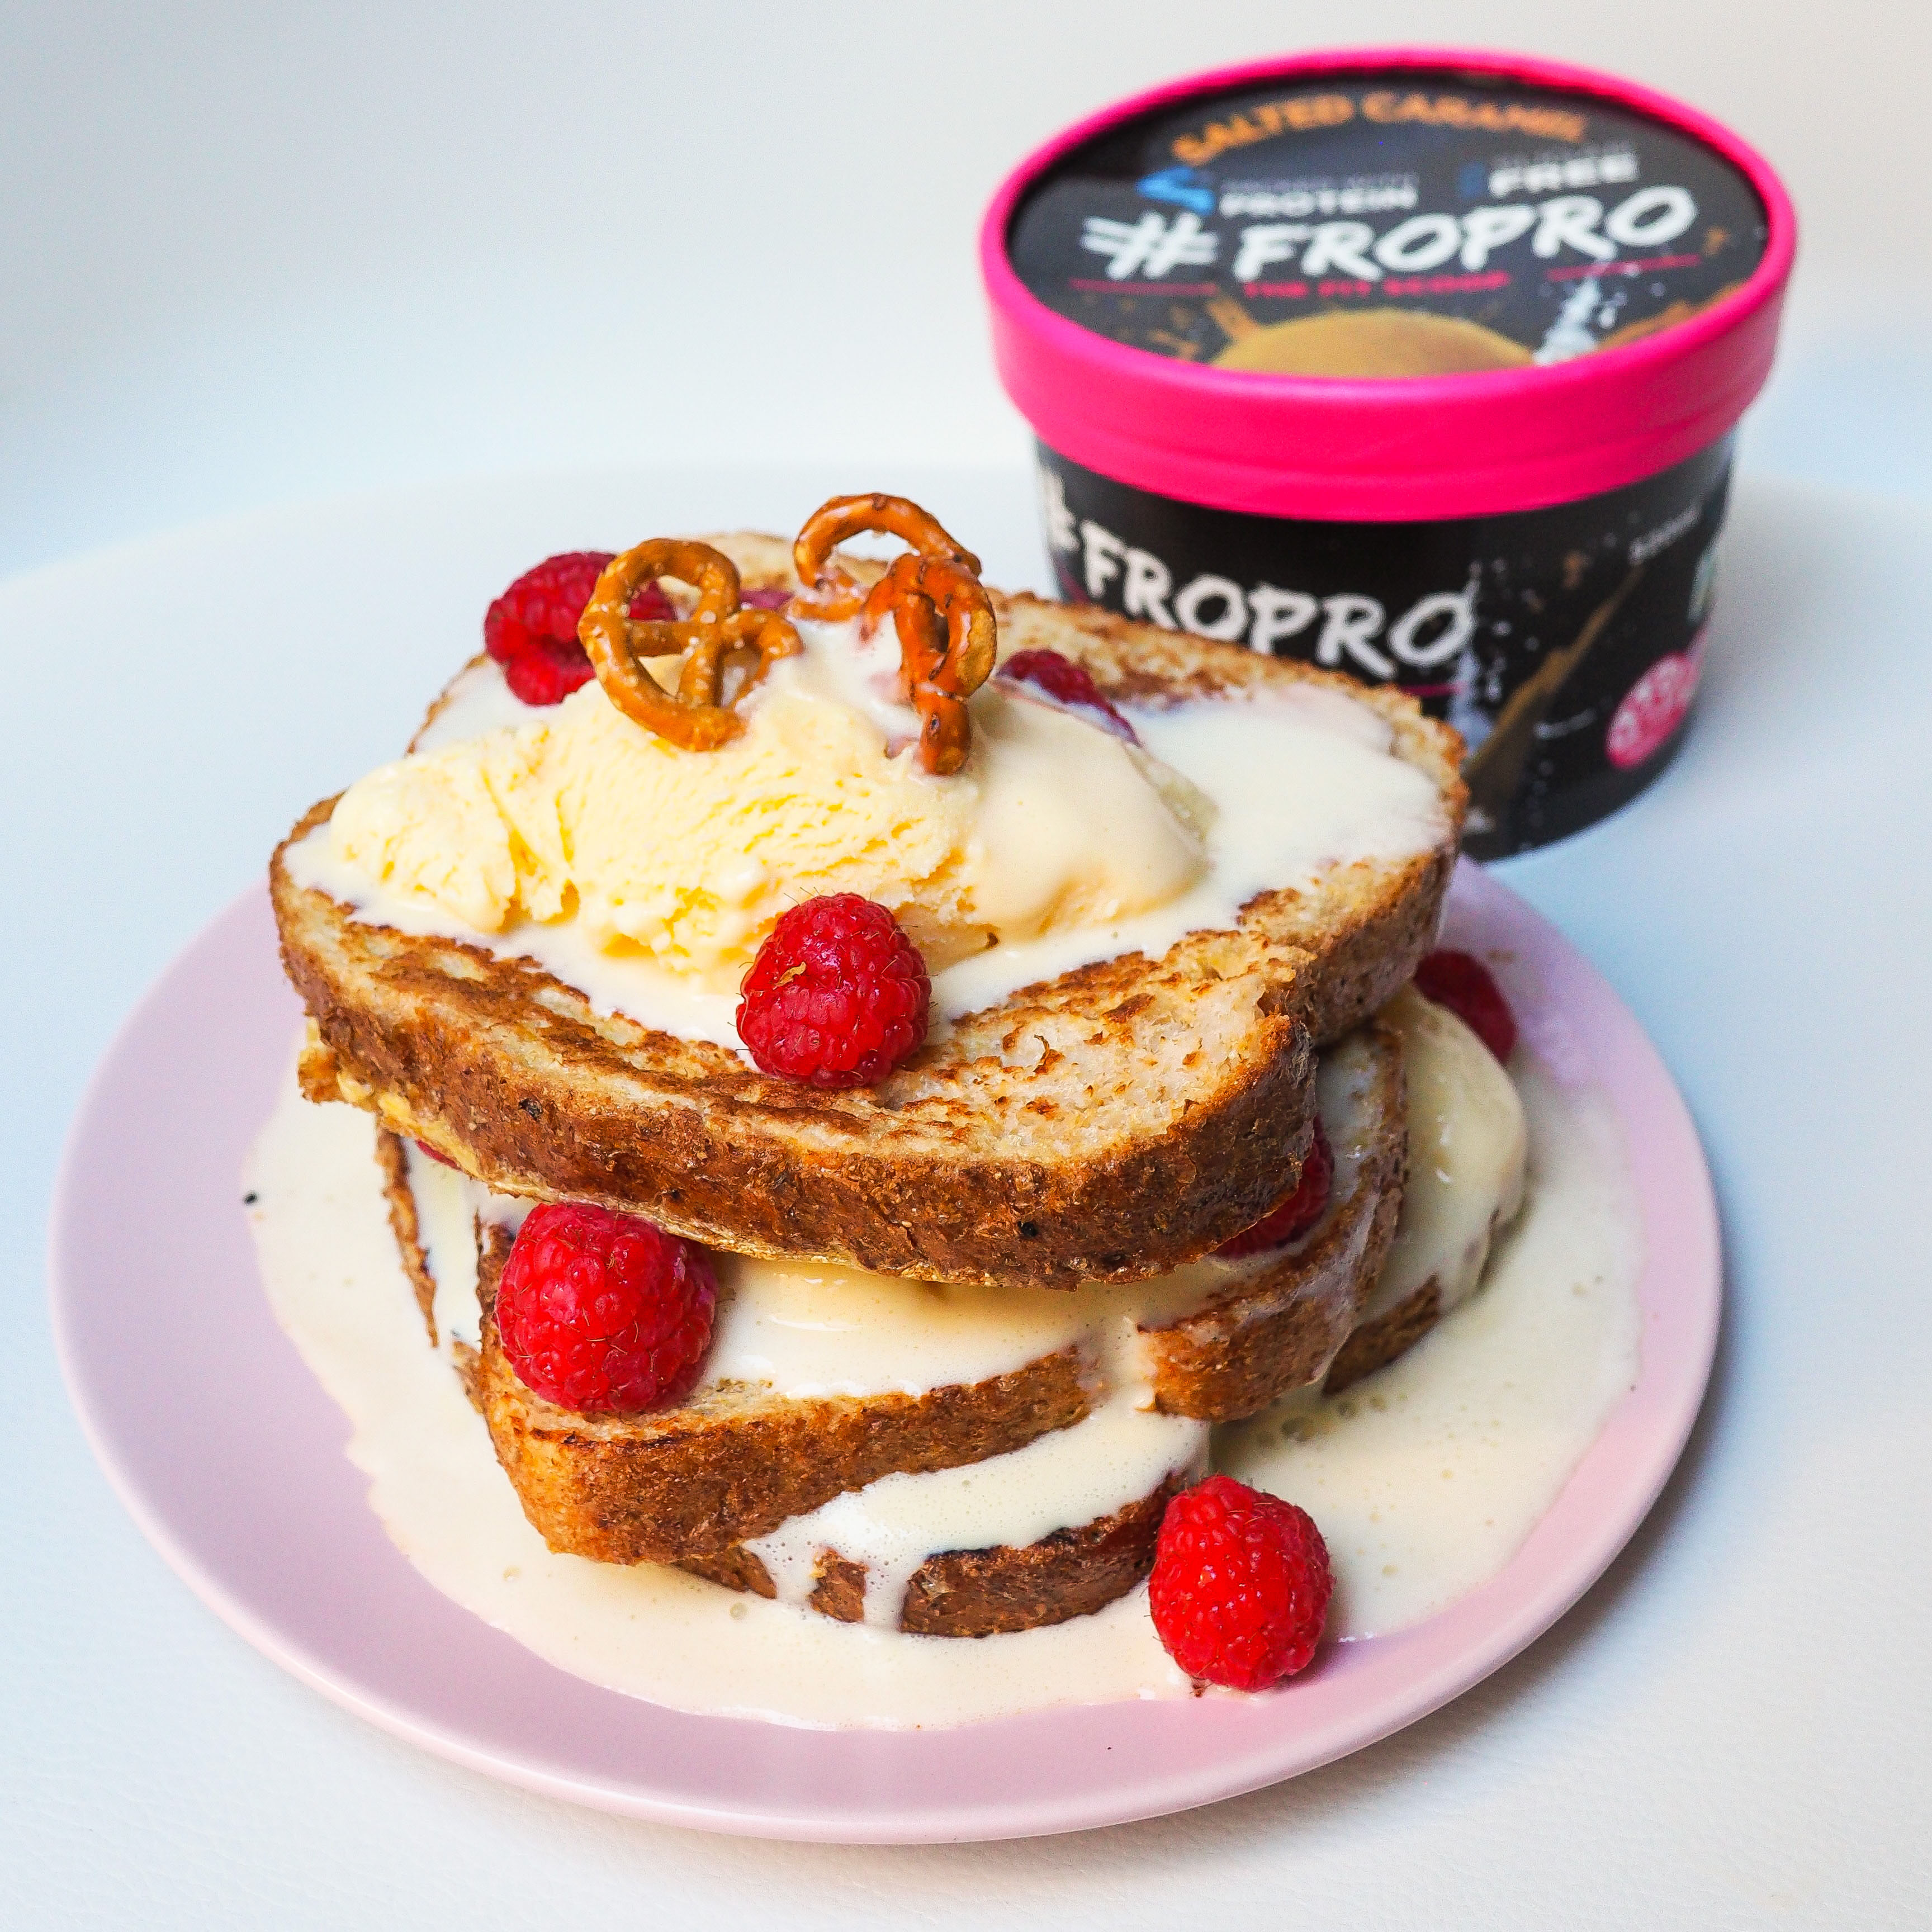 French Toast with Salted Caramel FROPRO